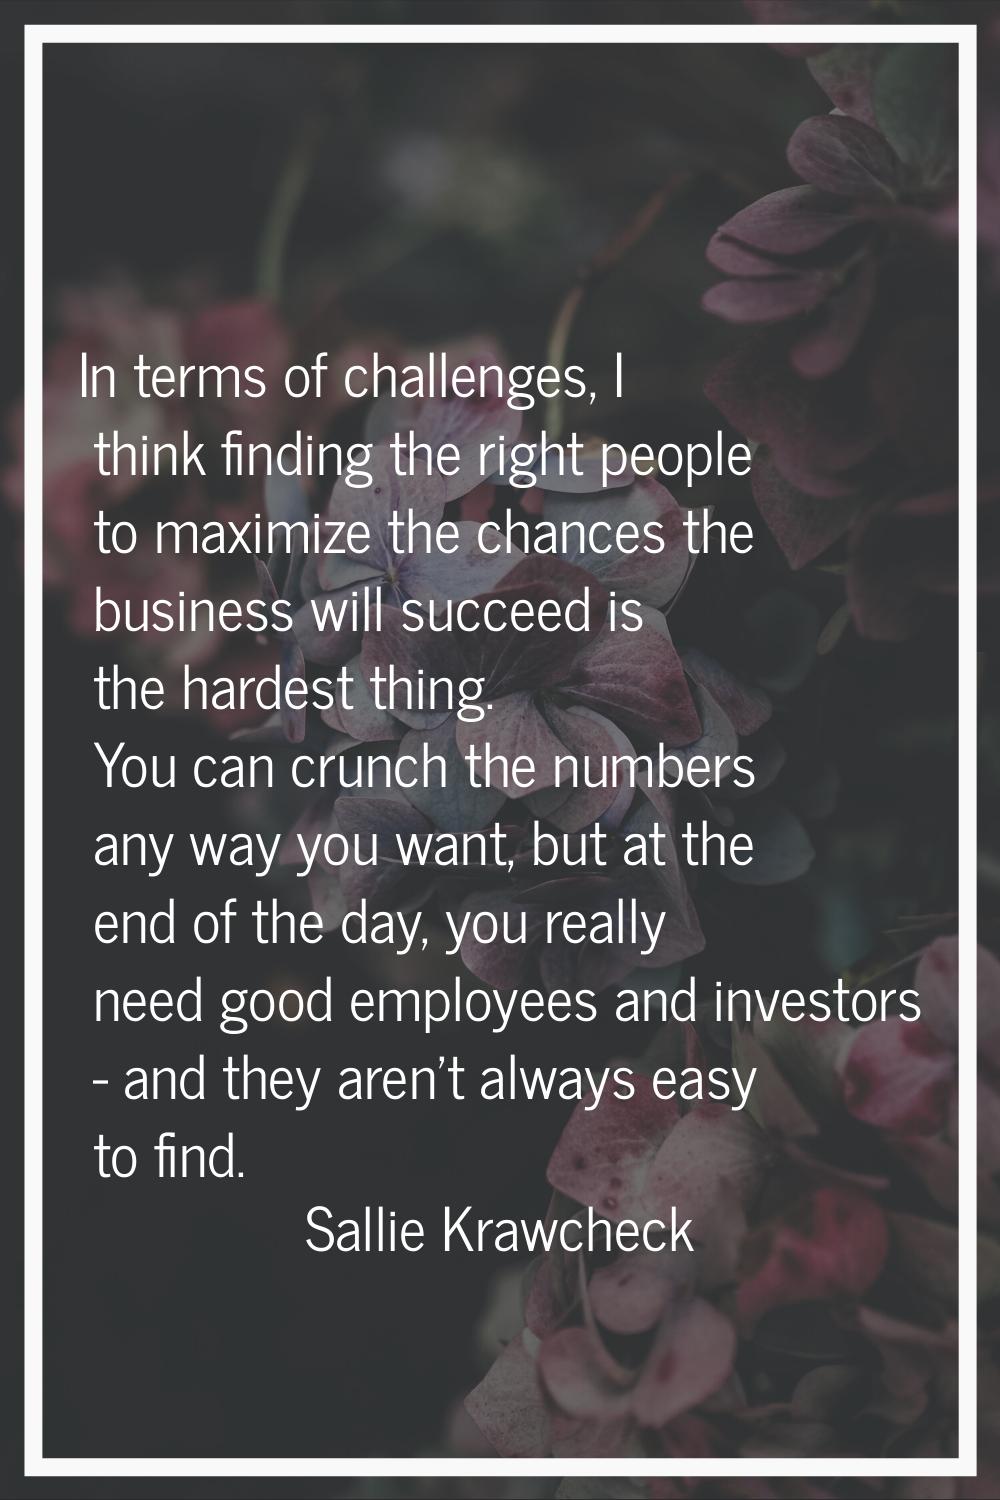 In terms of challenges, I think finding the right people to maximize the chances the business will 